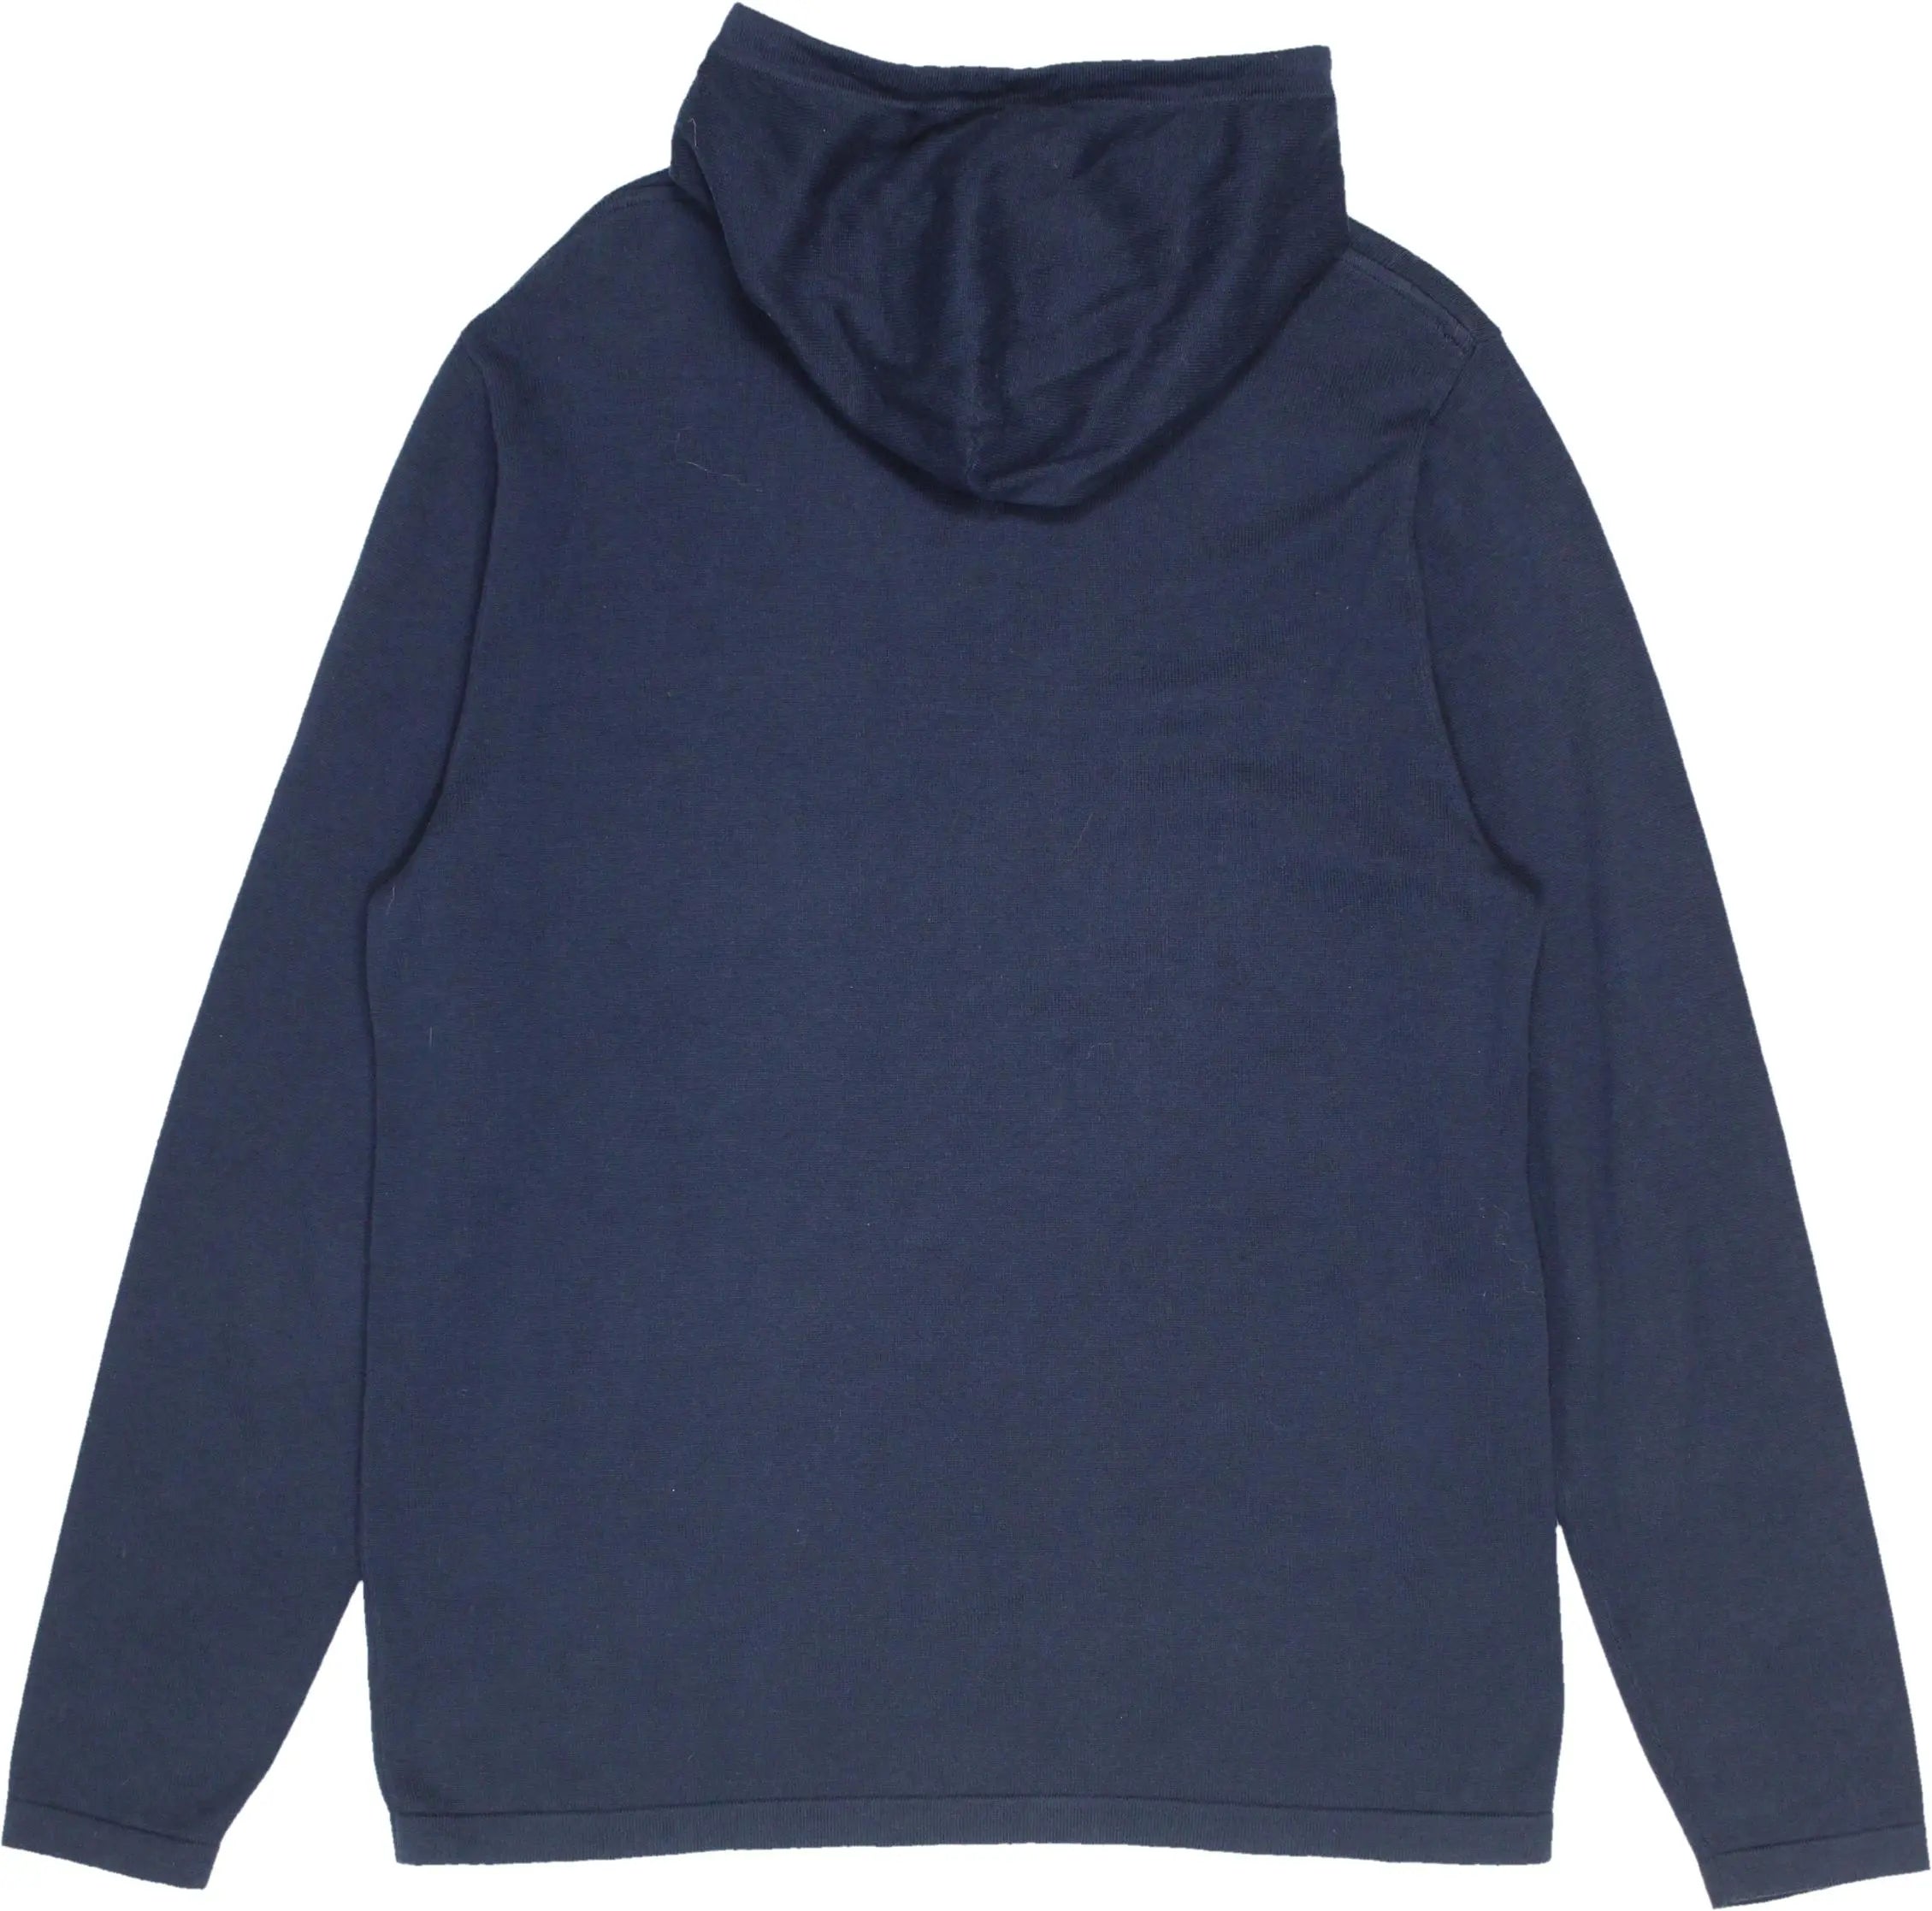 Tommy Hilfiger - Blue Hoodie by Tommy Hilfiger- ThriftTale.com - Vintage and second handclothing